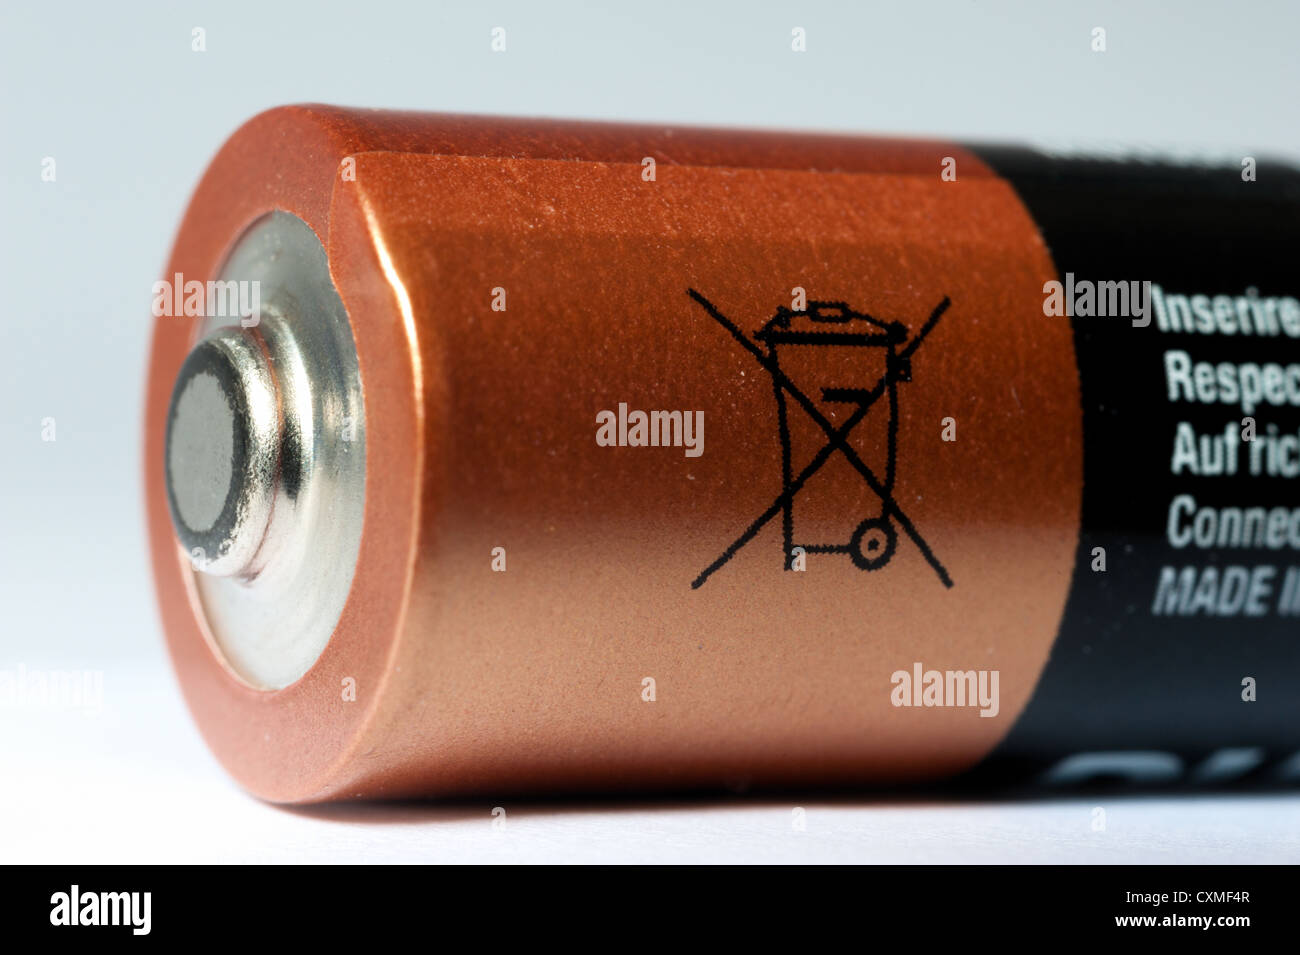 A battery with its recycle image Stock Photo